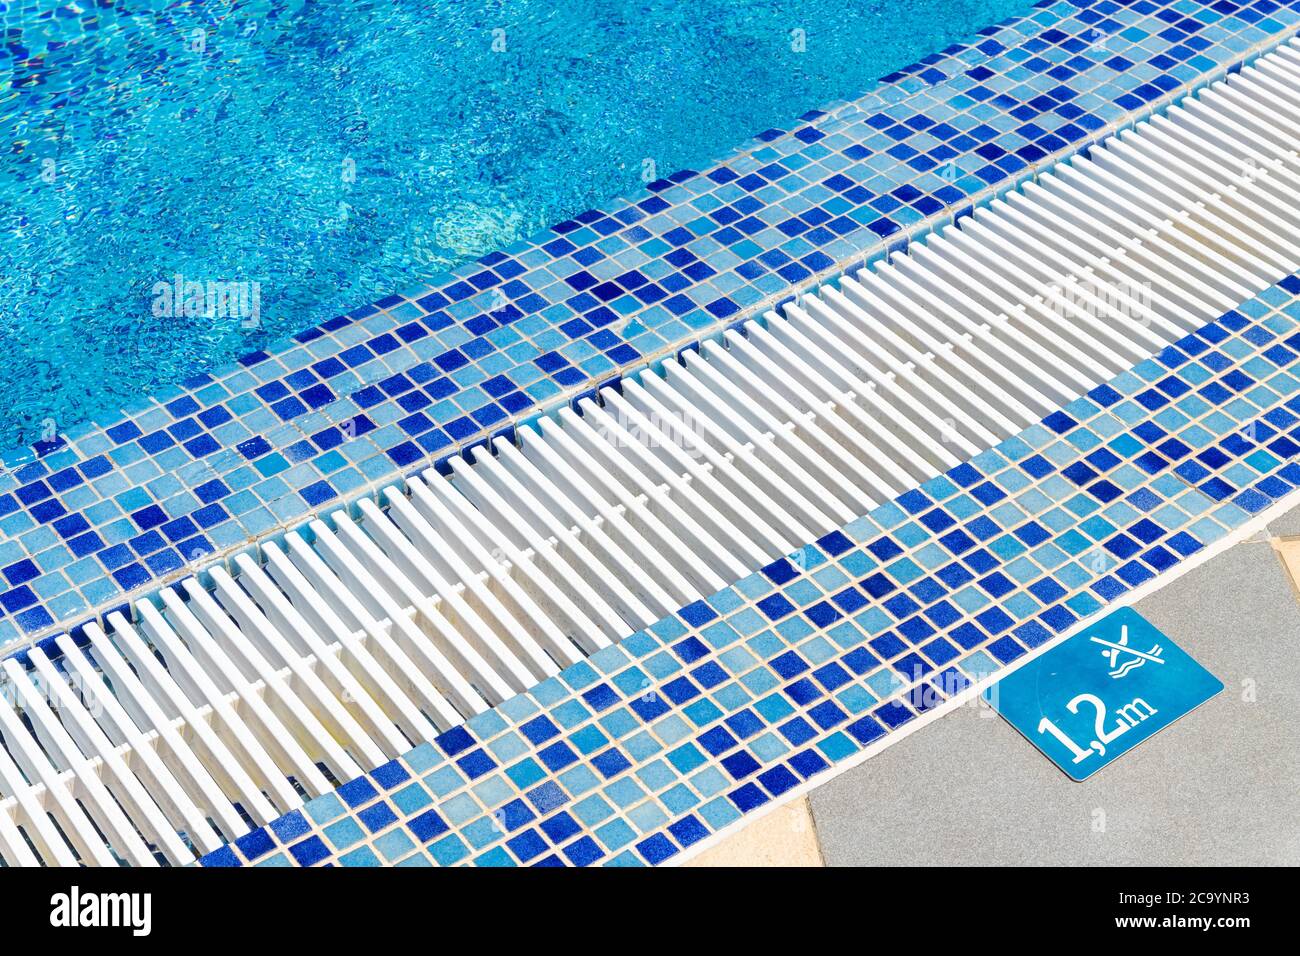 Edge of pool with indication of depth of 1.2 meters and sign that prohibits jumping Stock Photo